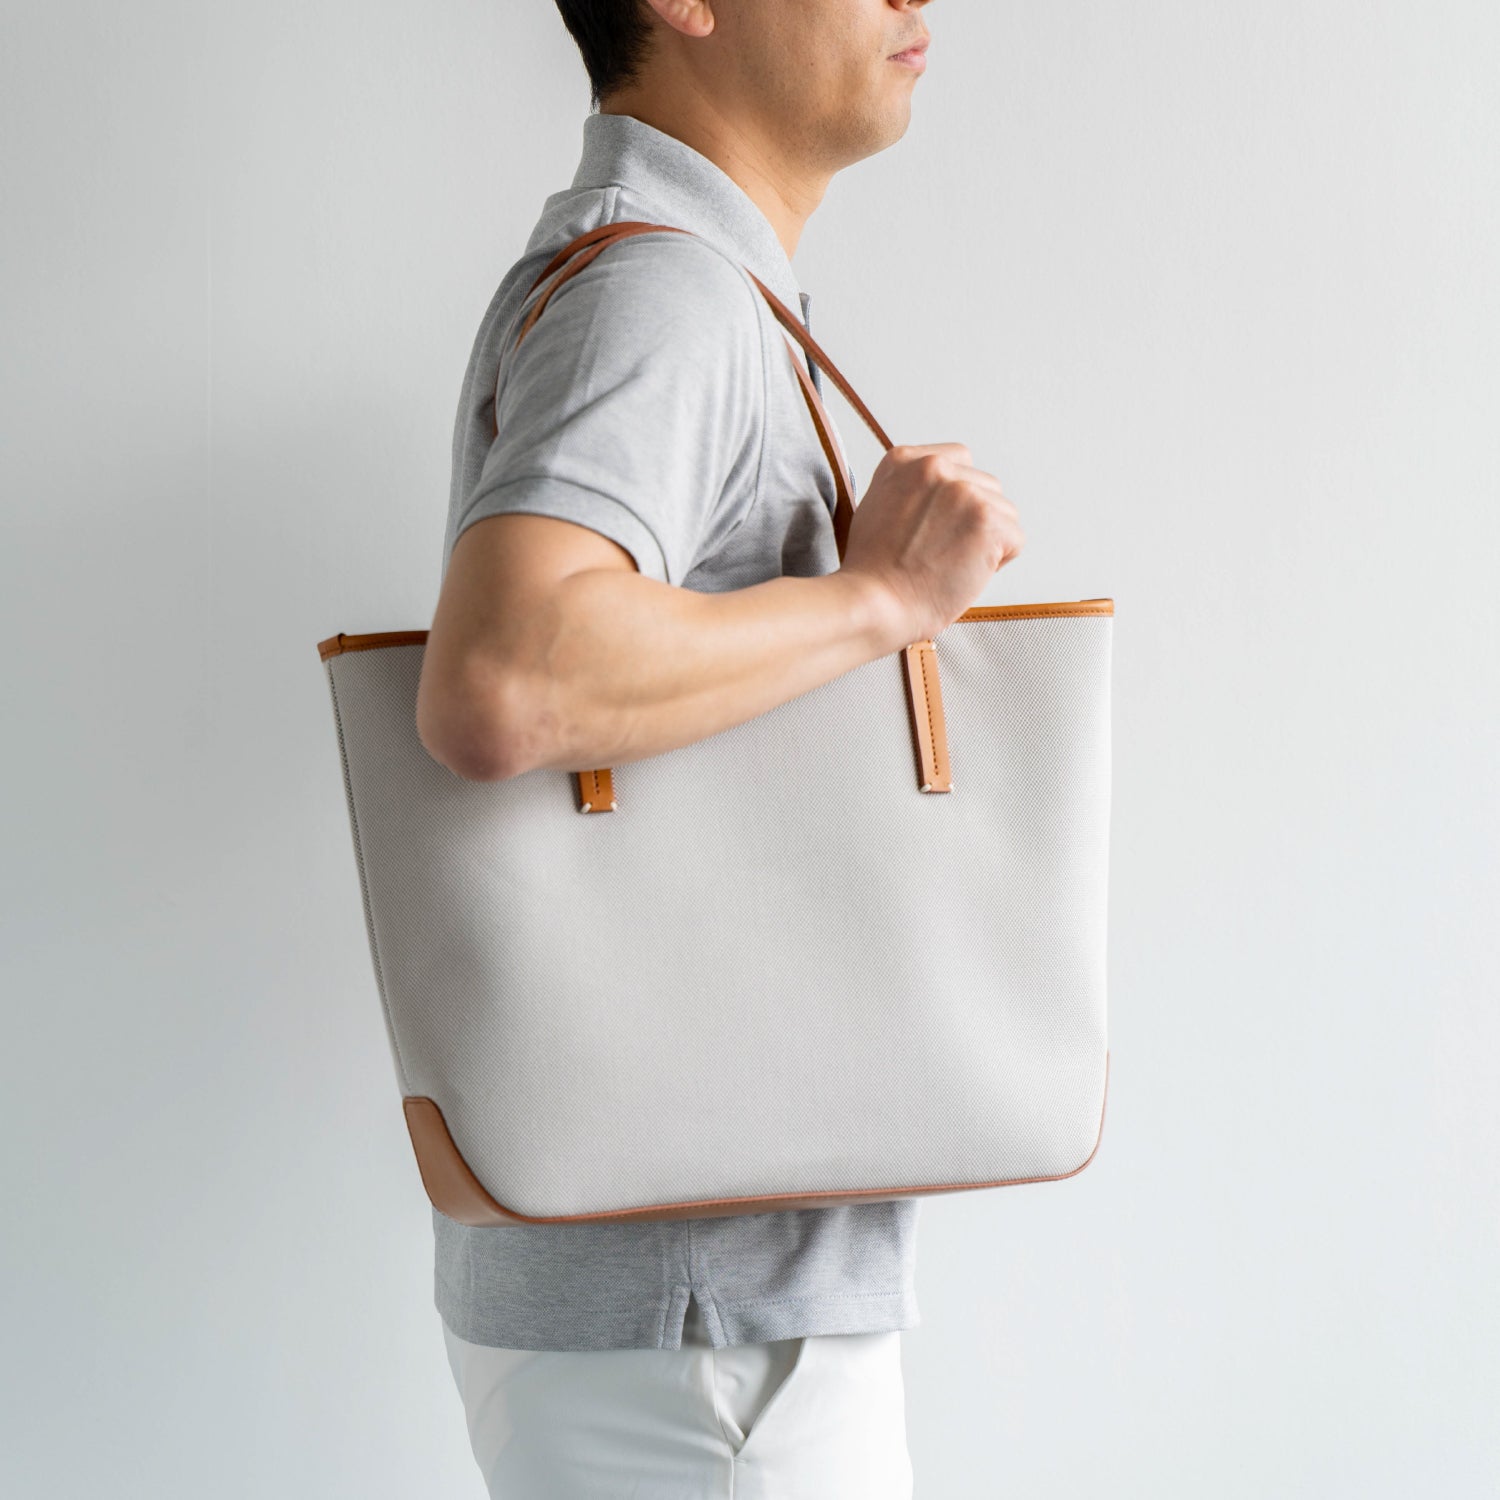 For the blue canvas tote camel